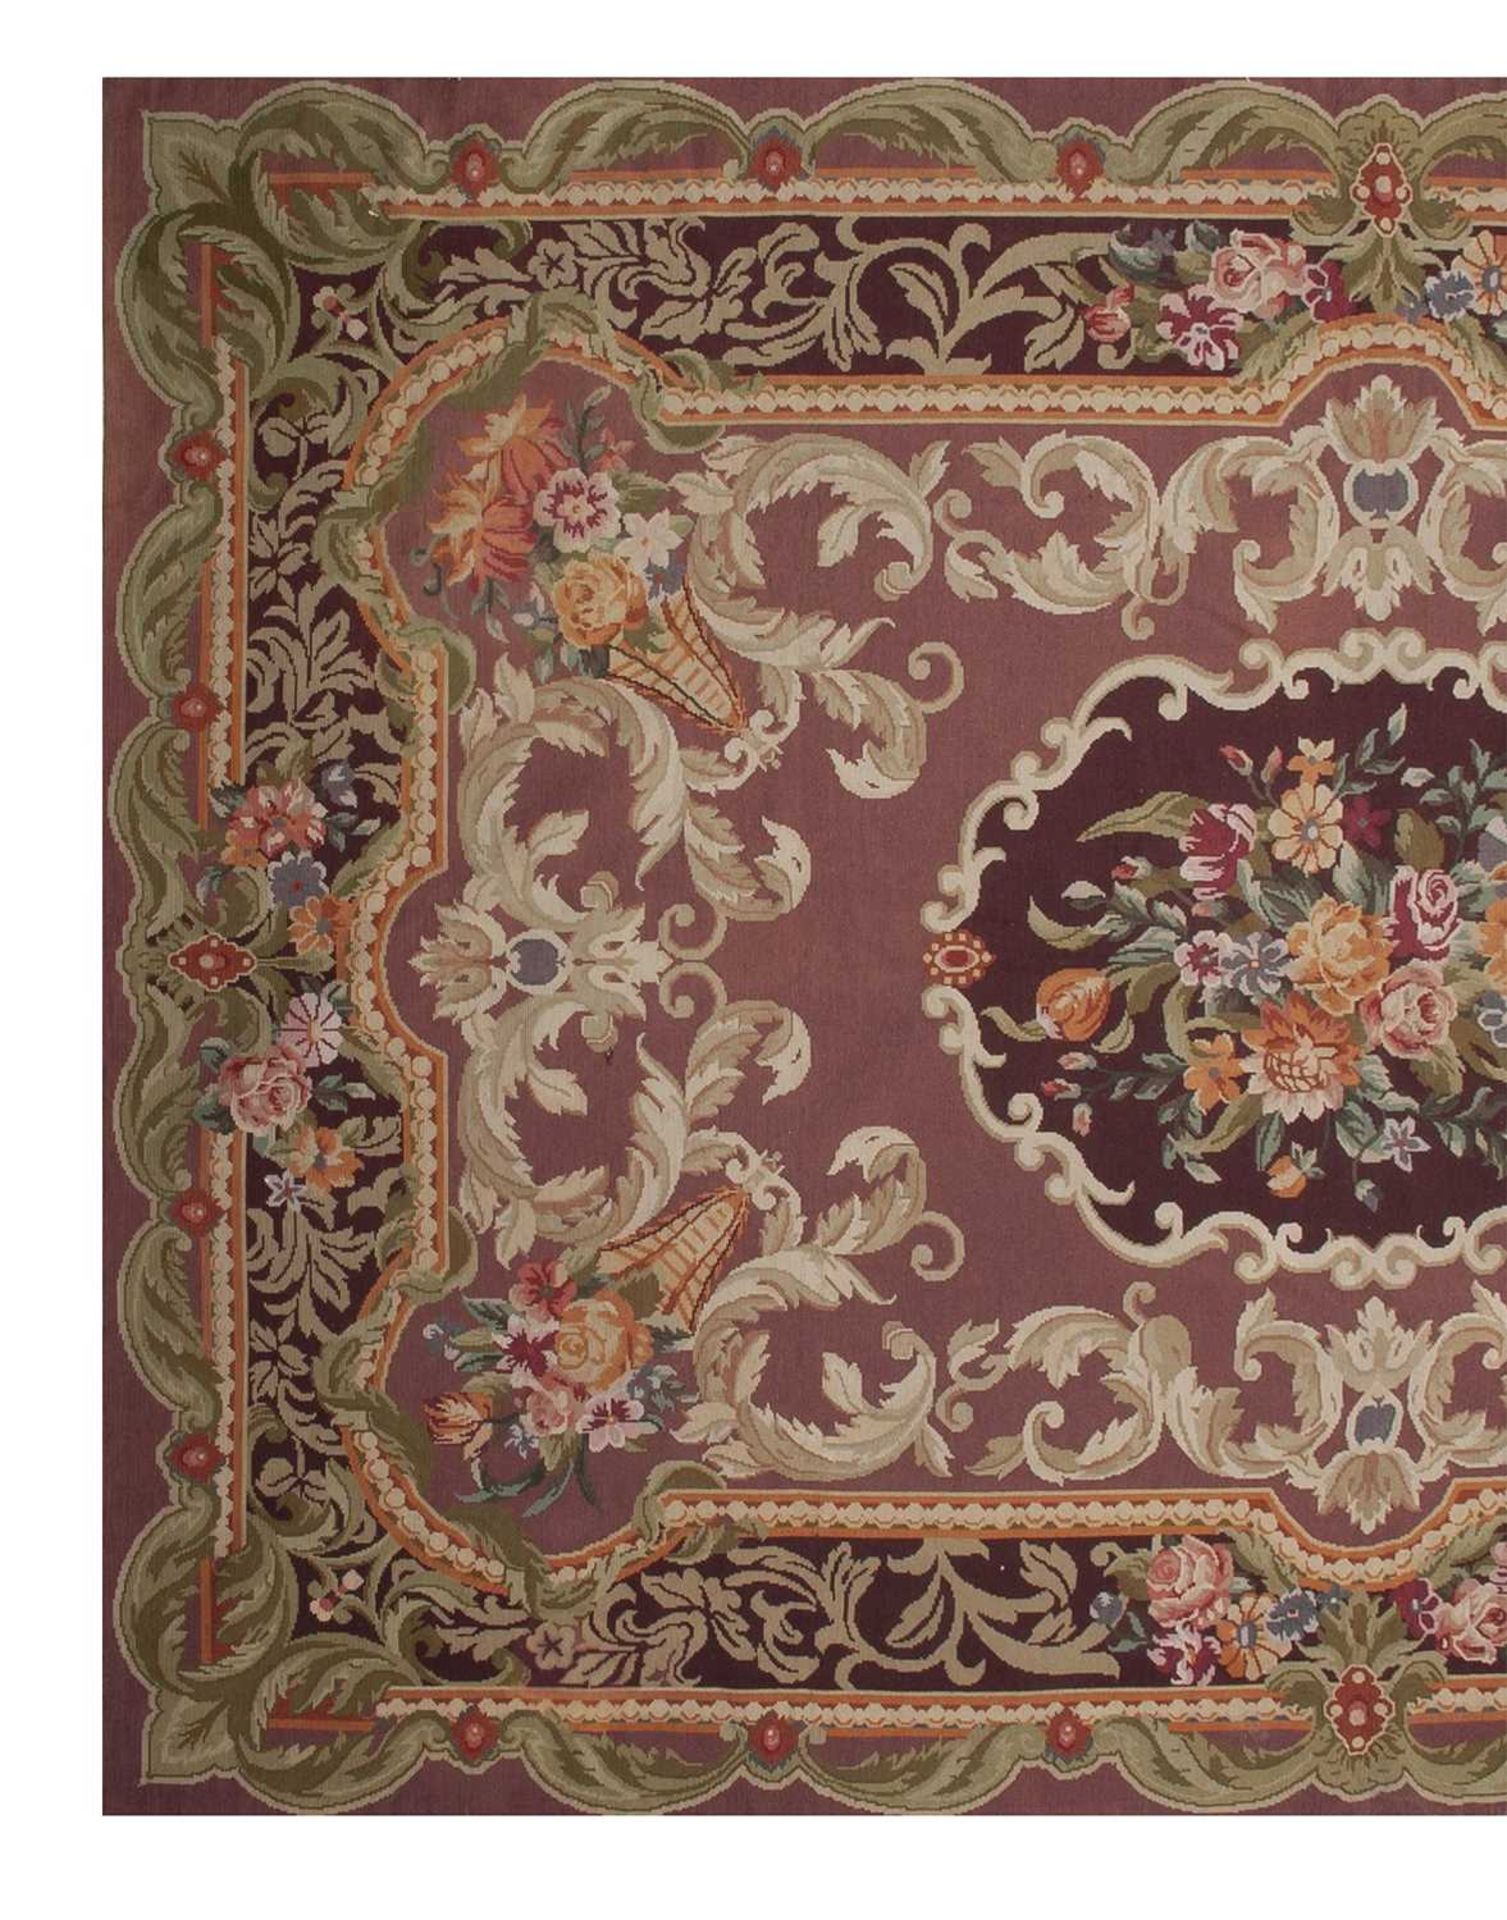 AN EARLY 20TH CENTURY AUBUSSON DESIGN TAPESTRY - Image 2 of 2